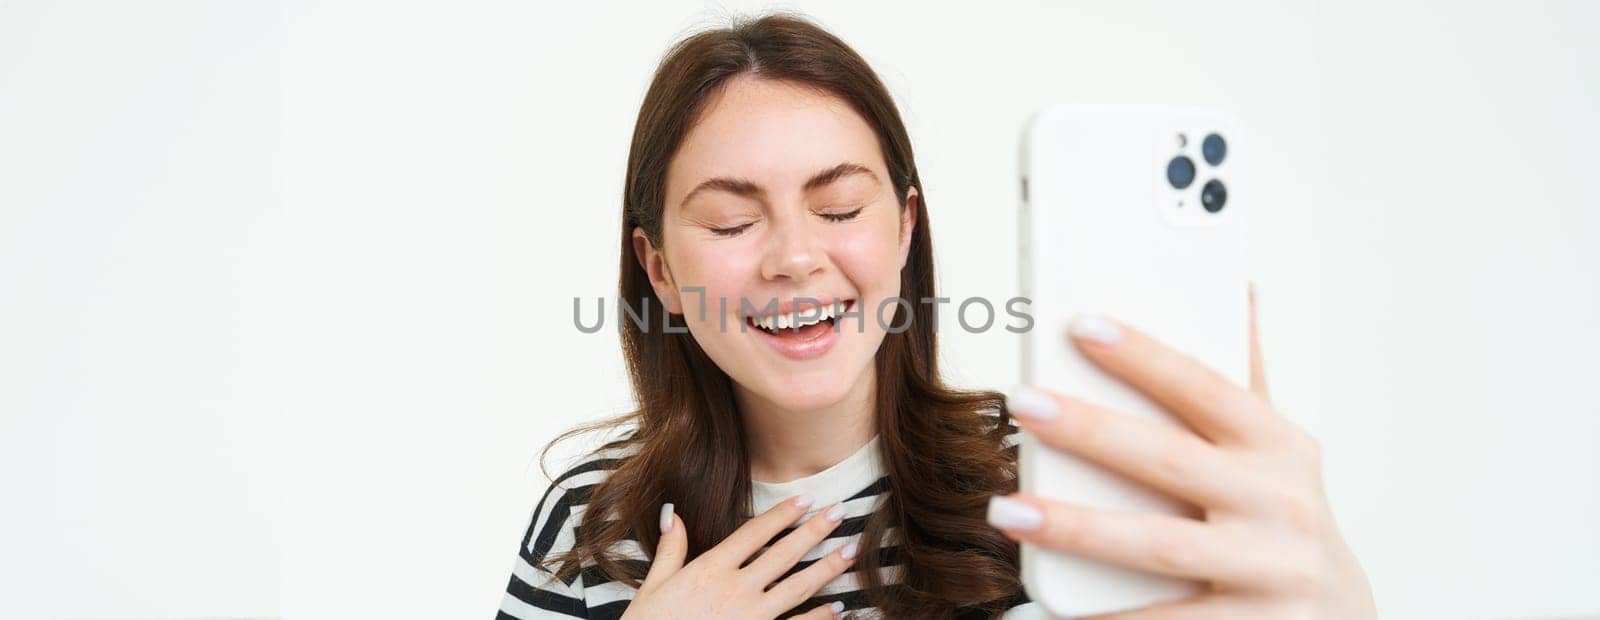 Portrait of woman laughing while taking selfie with funny photo filters, standing over white isolated background.